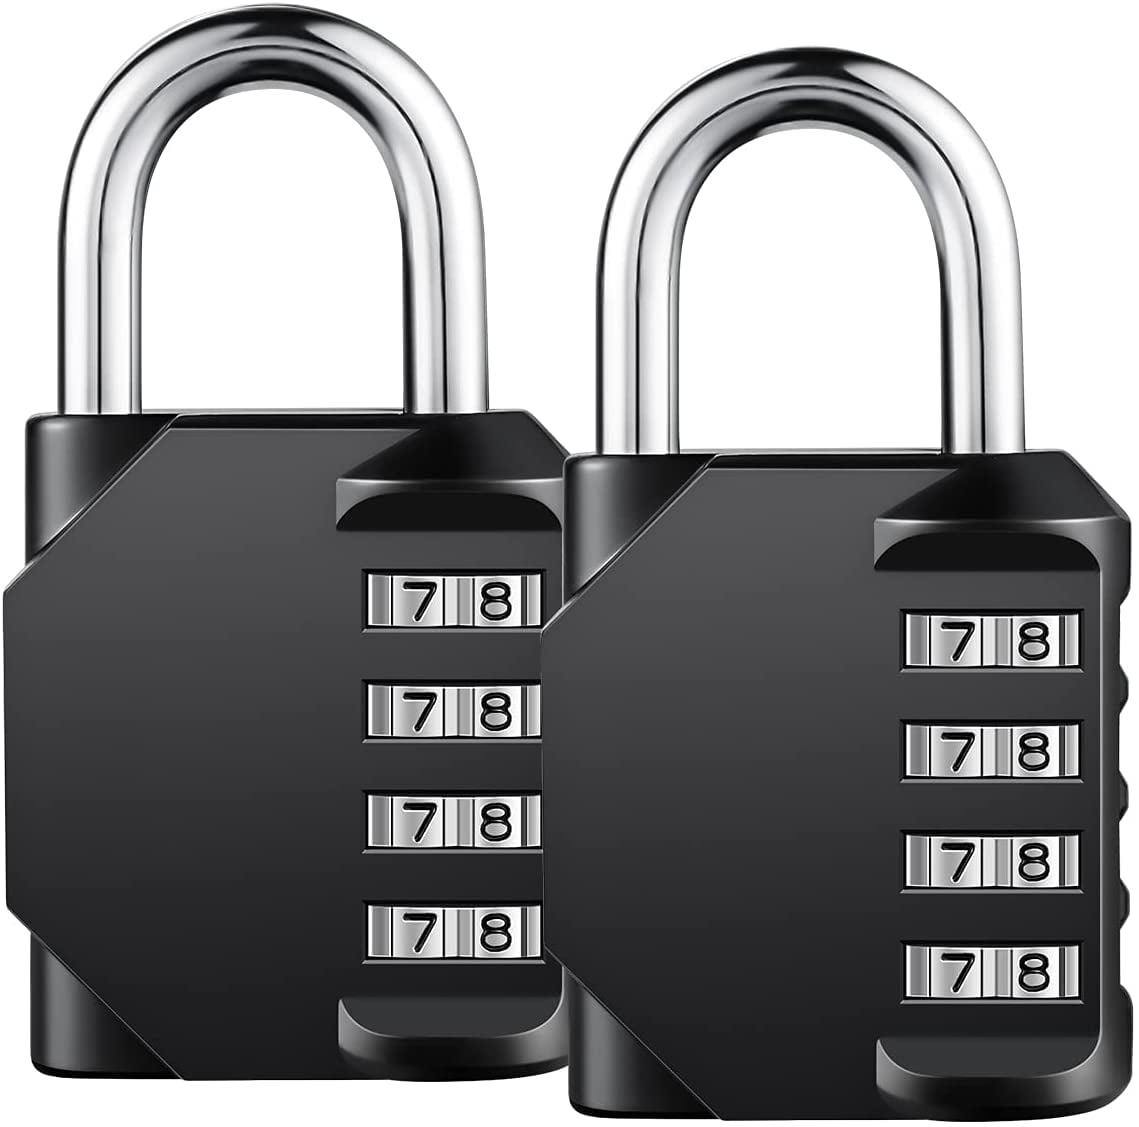 School - Zinc Alloy Material 10000 Combinations for Gym Weatherproof Padlock ORIA 4-Digit Security Number Code Lock with Keys Outdoor Shed Combination Padlock Newest Version, 2 Pack Lockers 